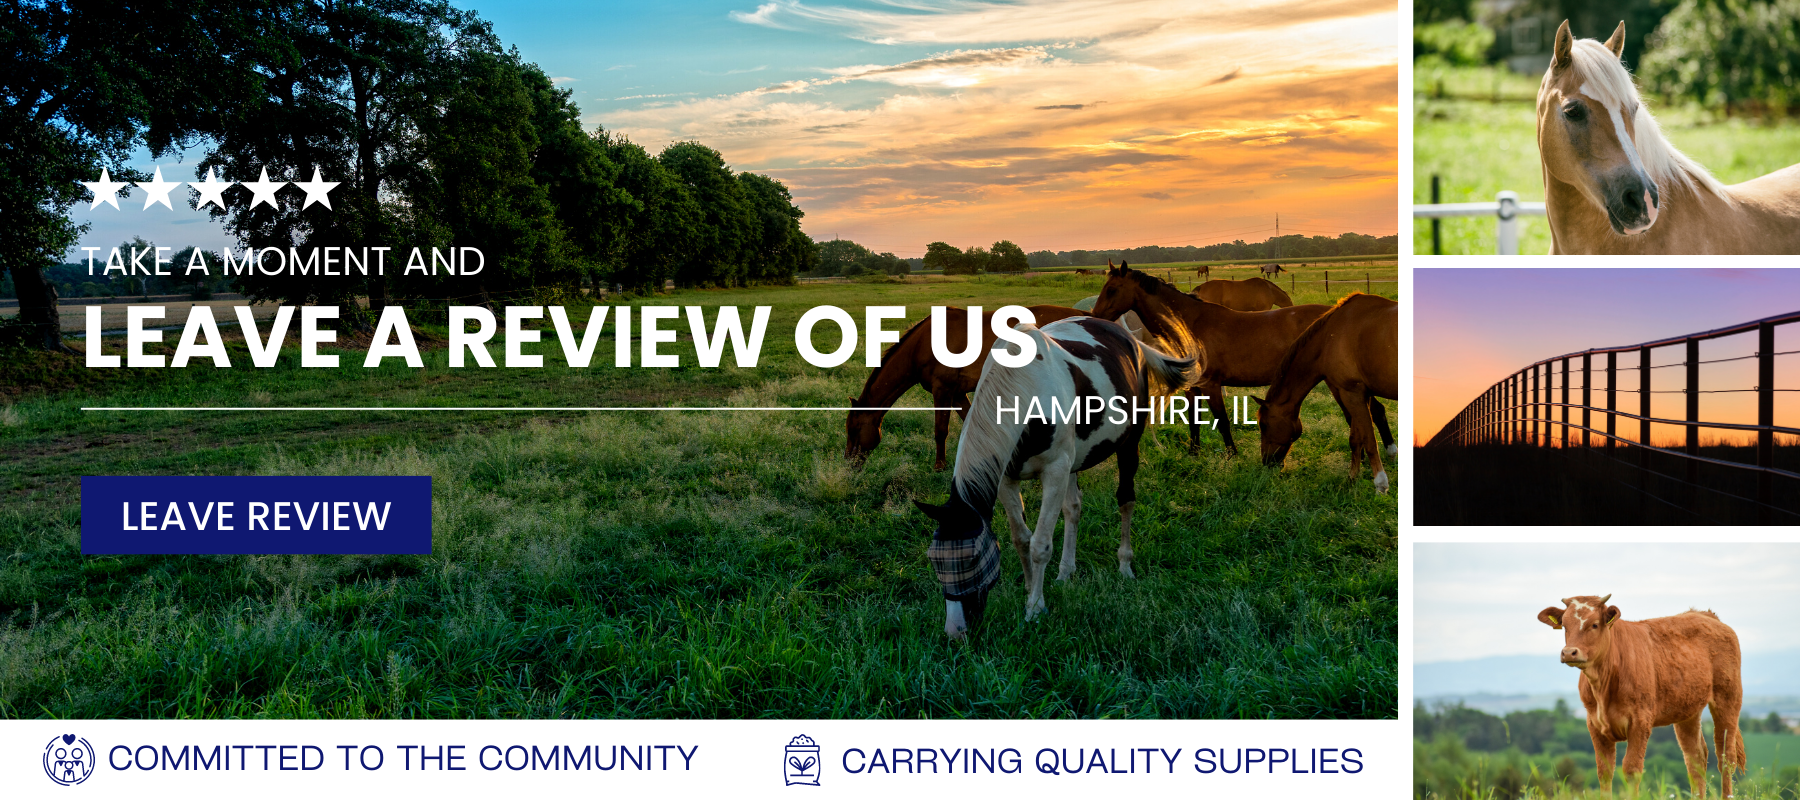 Review us banner